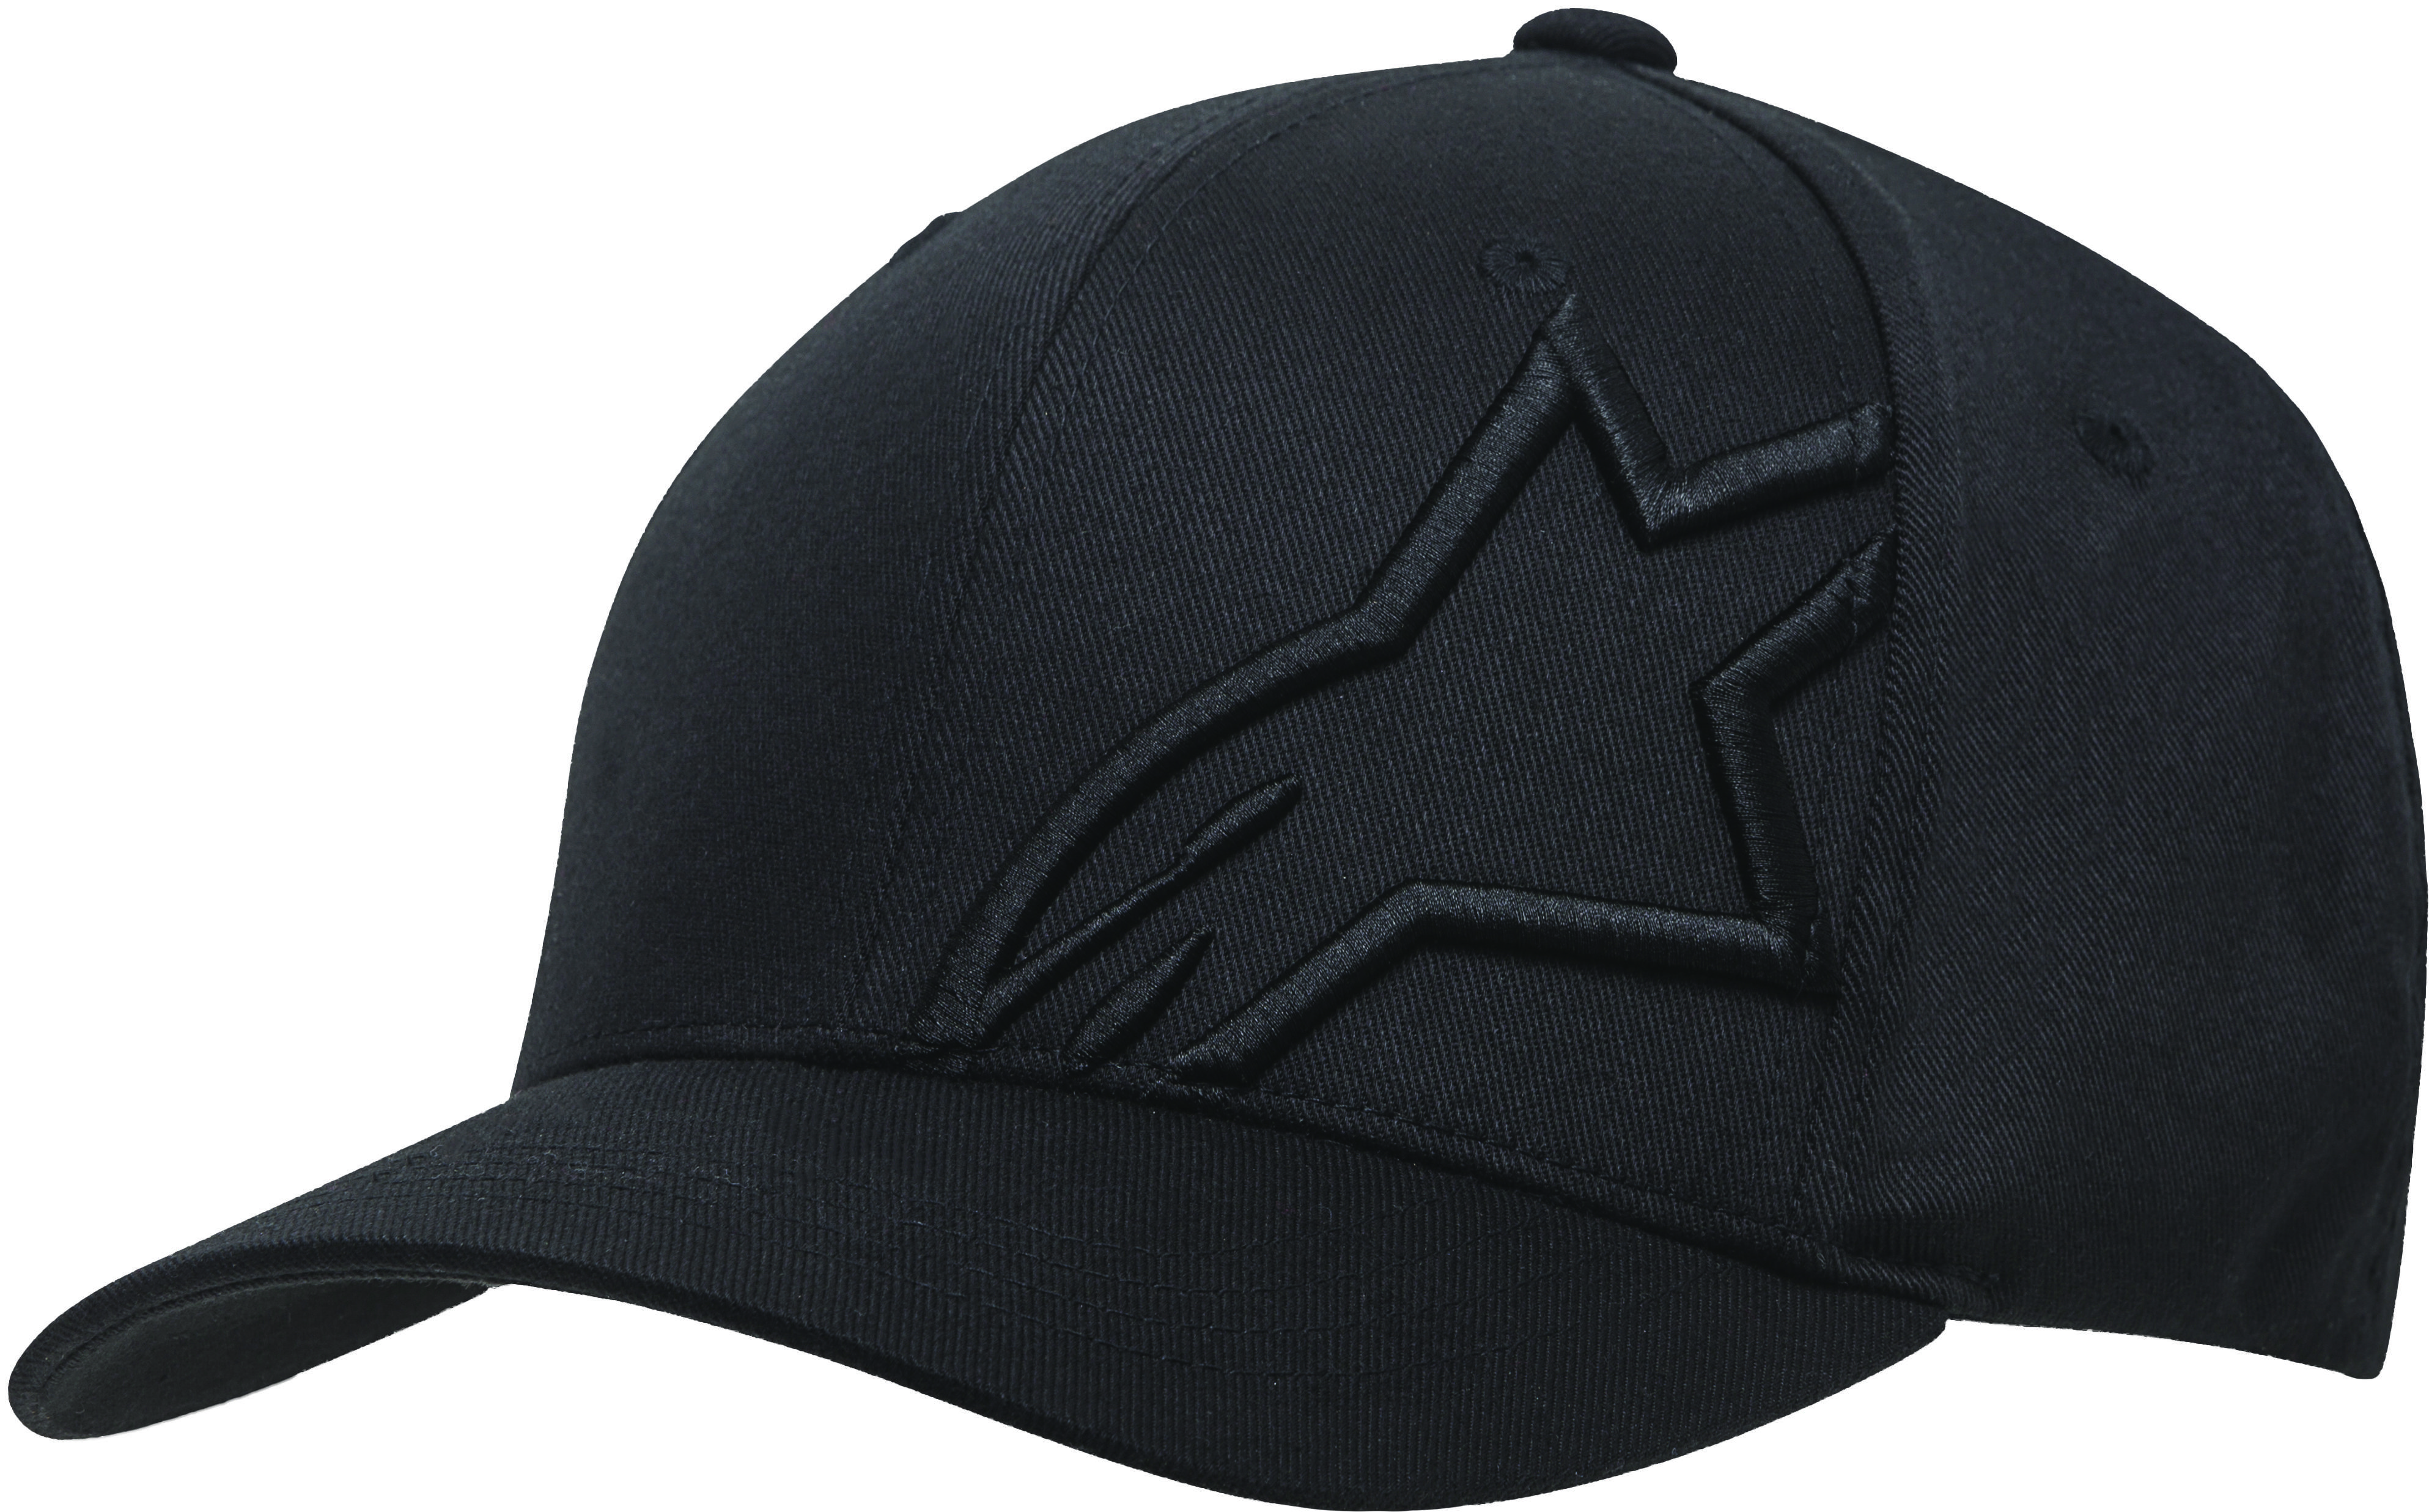 Corporate Shift 2 Curved Brim Hat Black/Black Large/X-Large - Click Image to Close